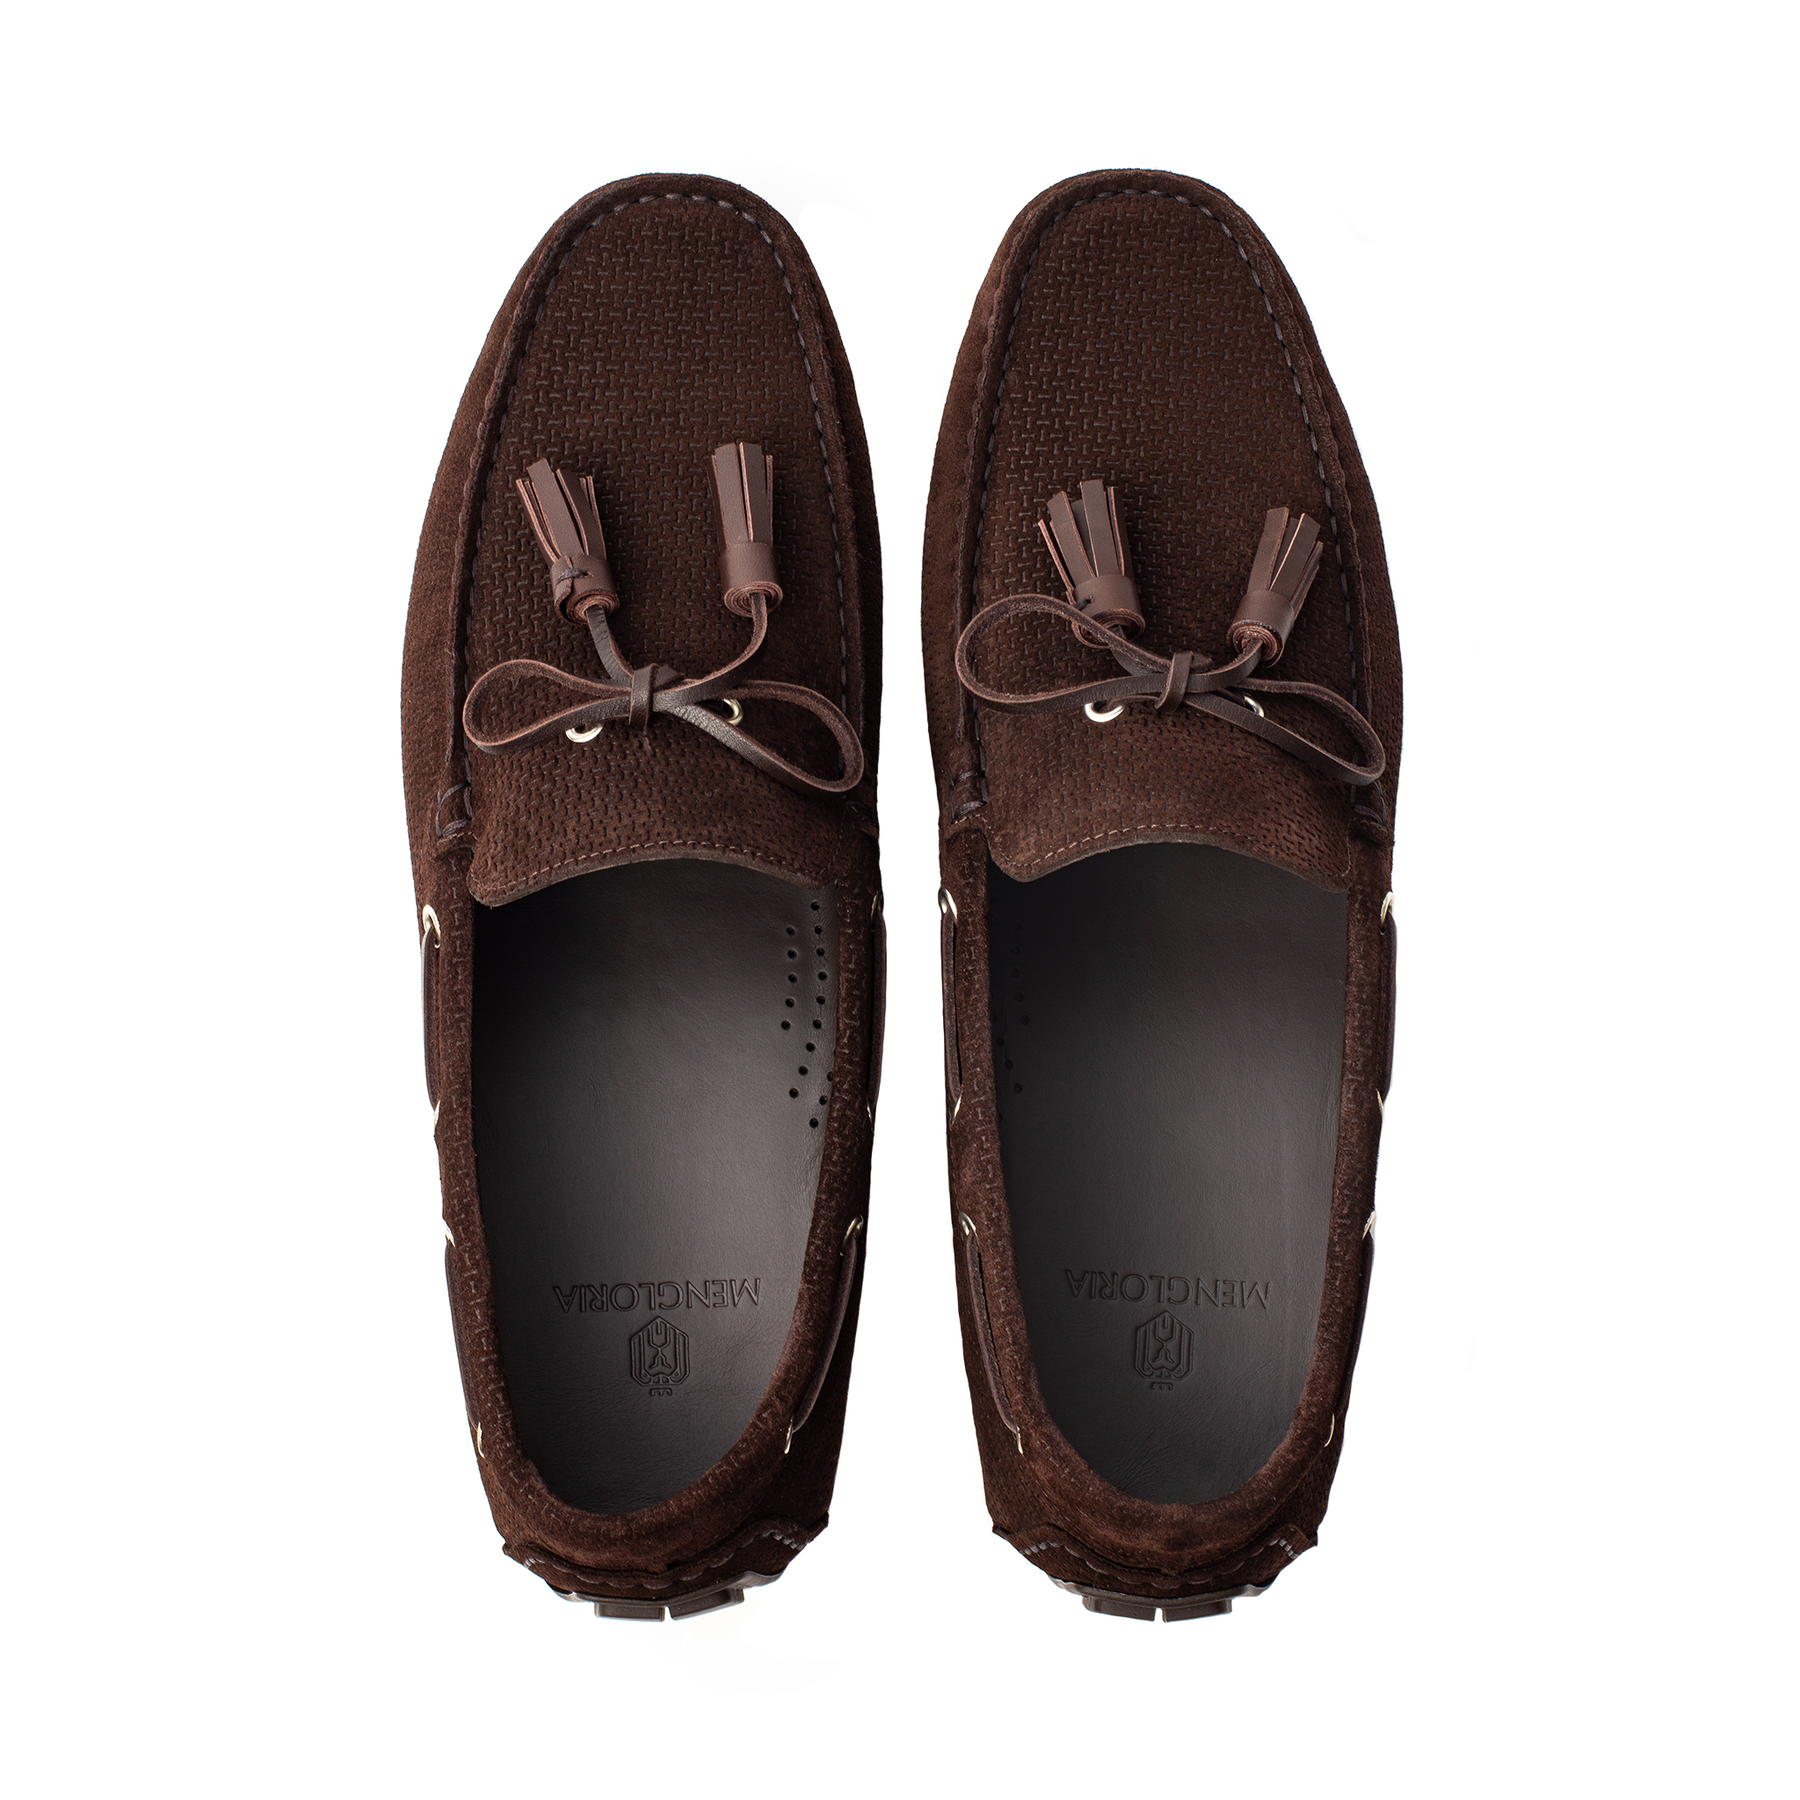 Prominence Suede With Tassels Moccasin | Dark Brown